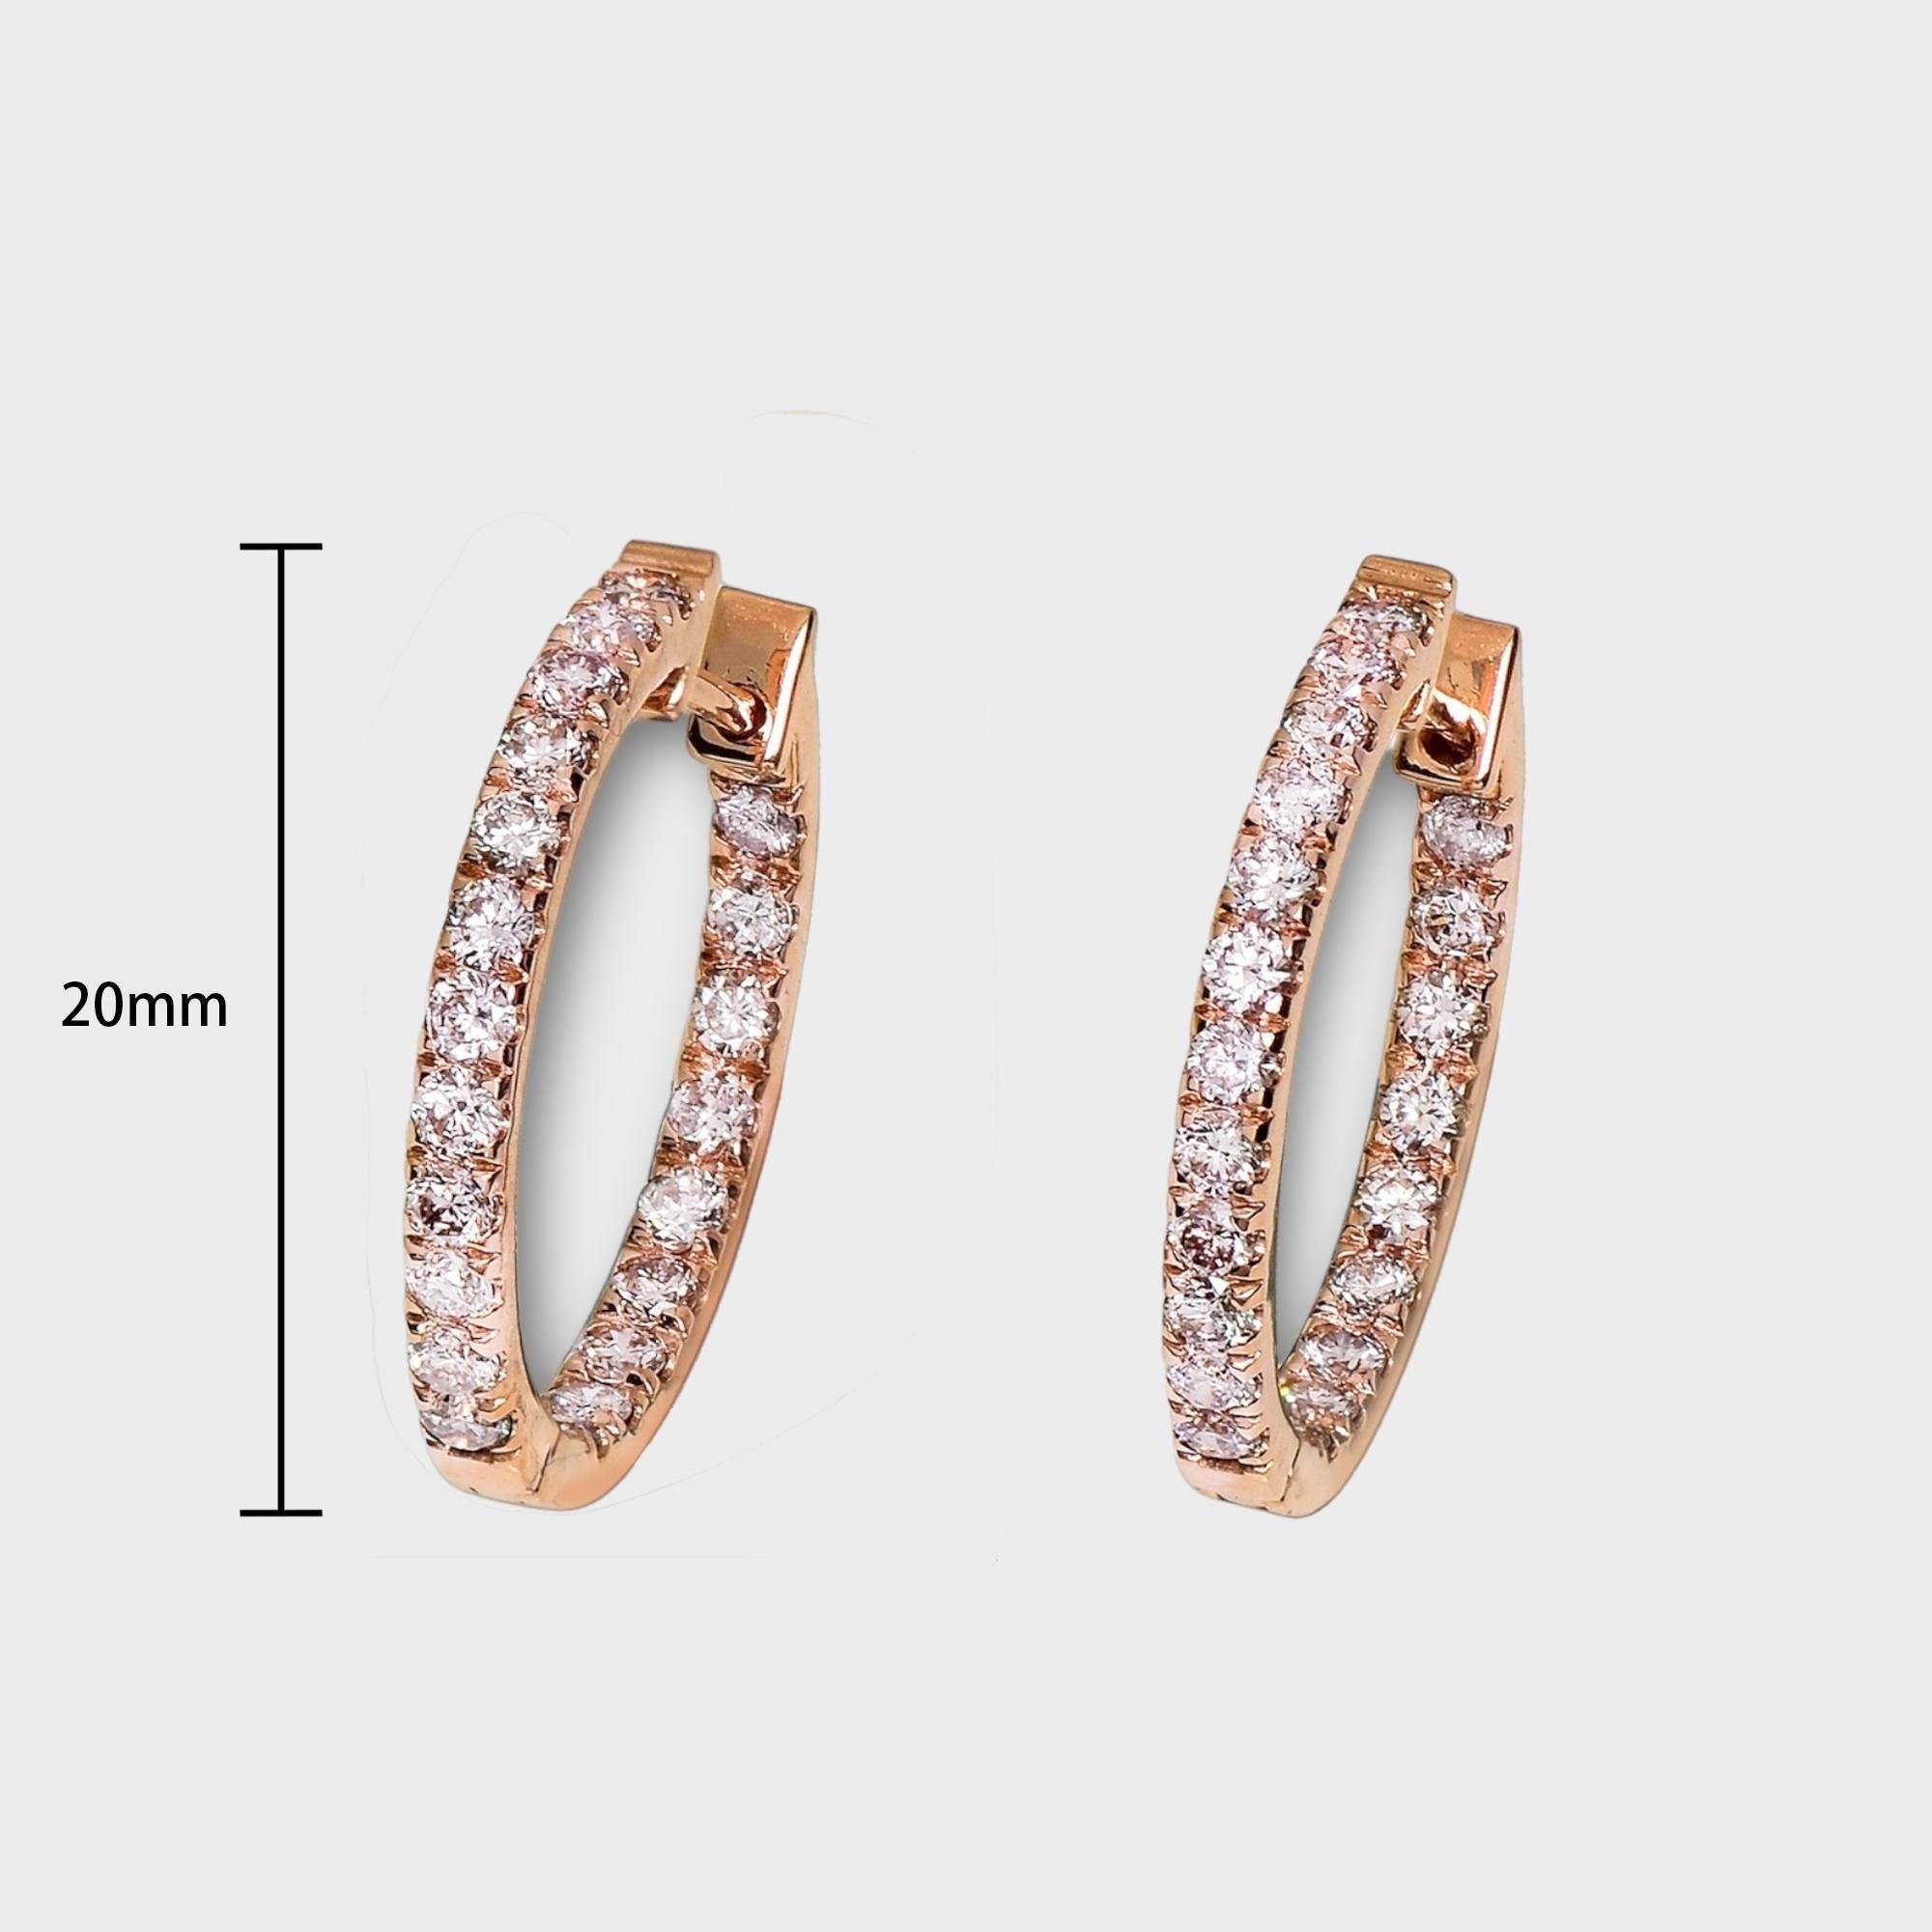 *IGI 14K 1.03 ct Natural Pink Diamonds Hoop Earrings*

Set with 42 pieces of round-shaped natural pink diamond weighing 1.03 carats, mounted in a 14K rose gold prongs setting design band.

Accompanied by IGI report no. 17J5429424, stating that the